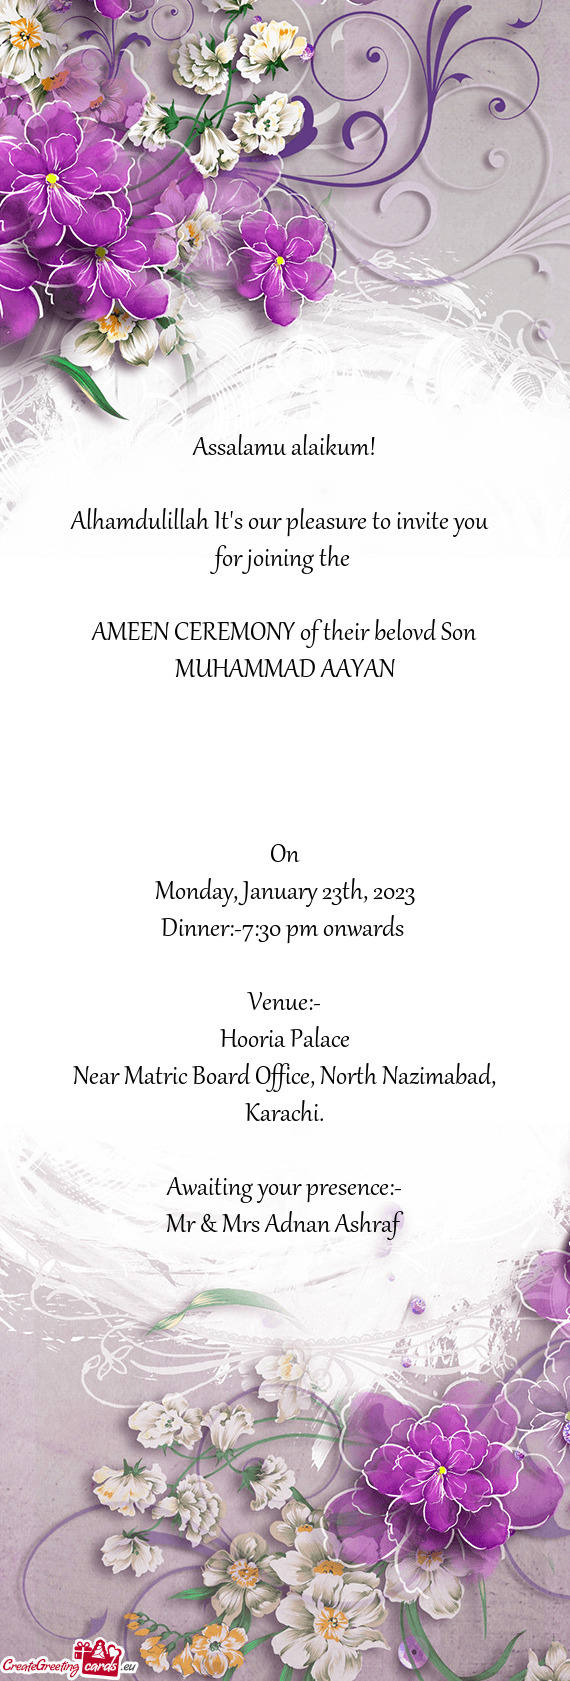 AMEEN CEREMONY of their belovd Son